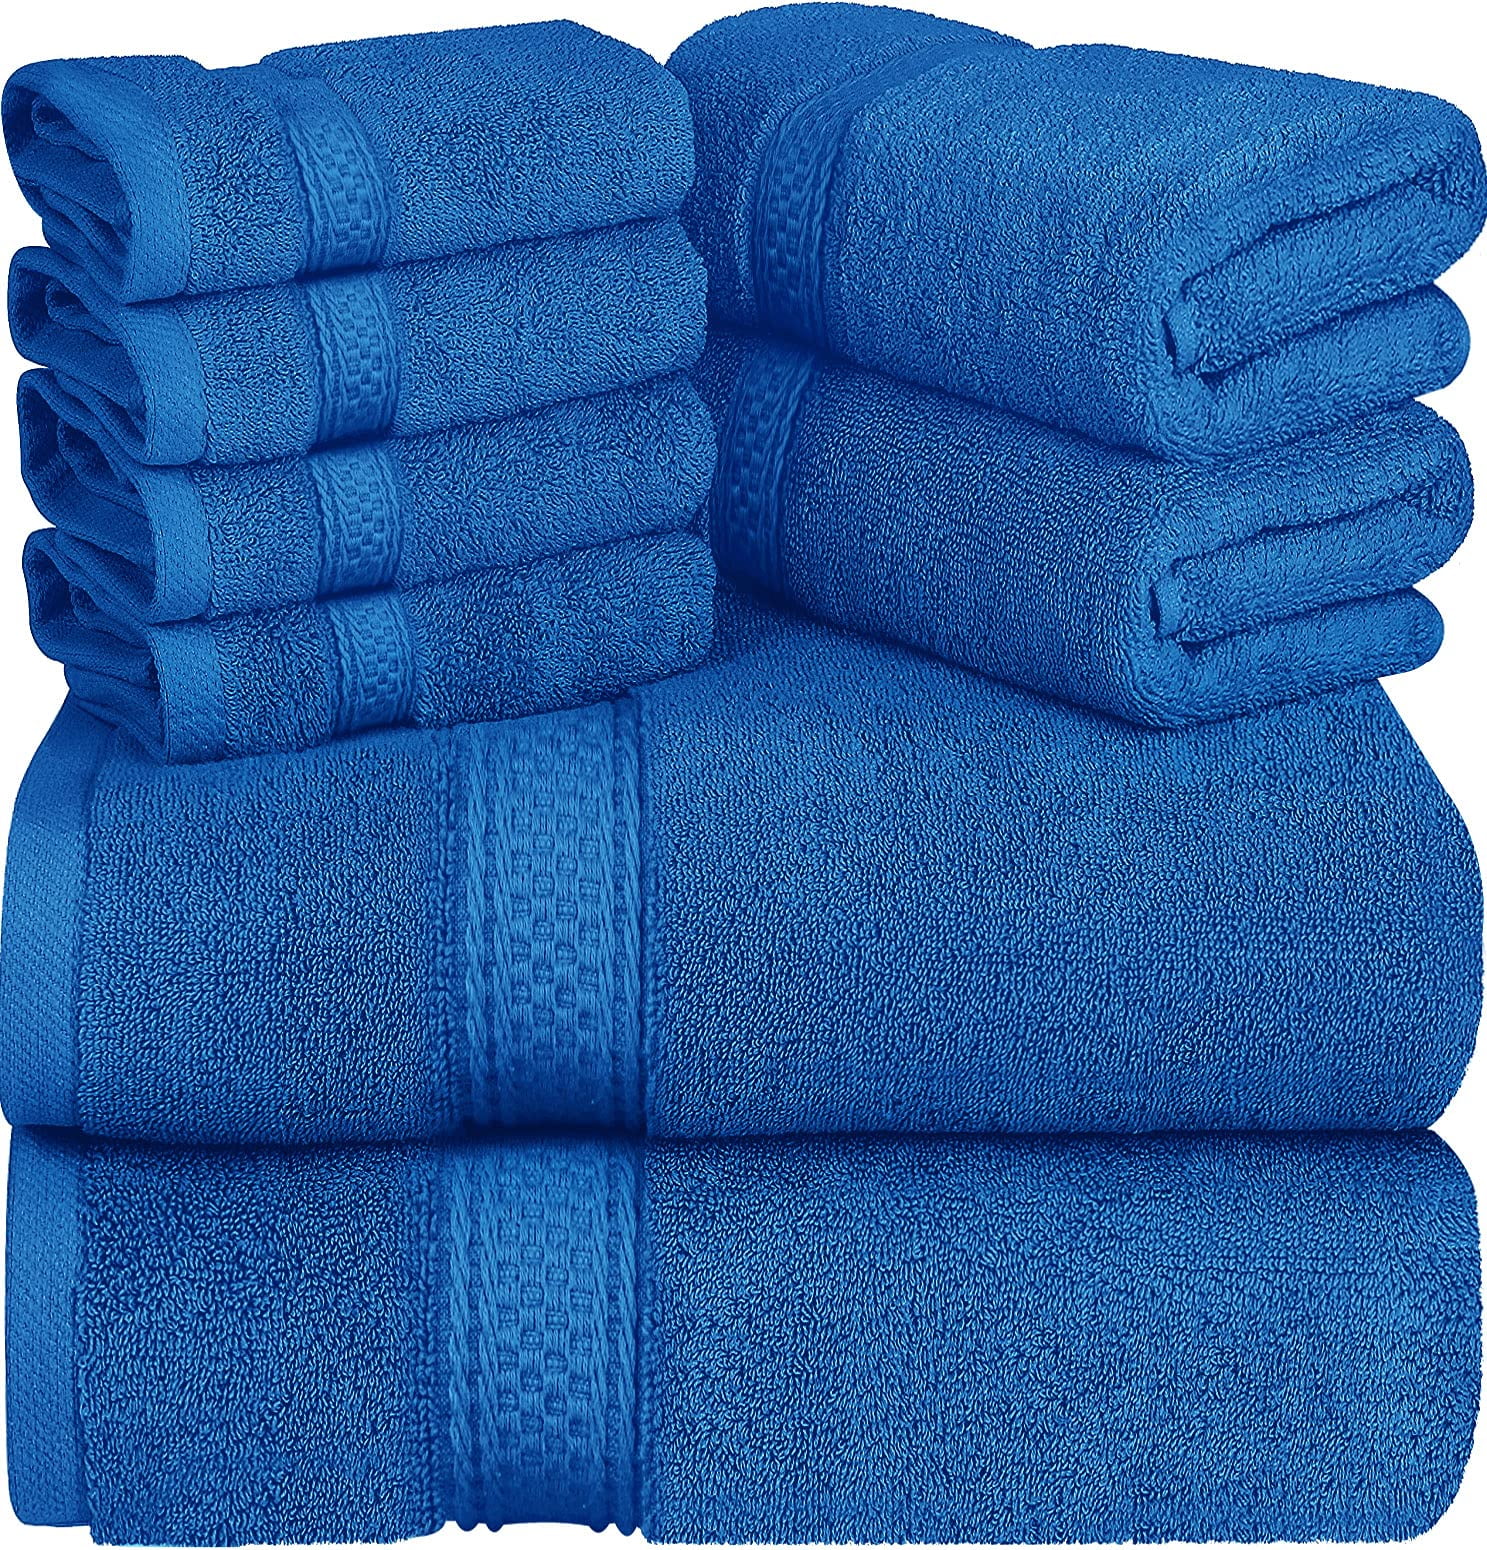 Solid Luxury Premium Cotton 900 GSM Highly Absorbent 2 Piece Bath Towel  Set, Light Blue by Blue Nile Mills